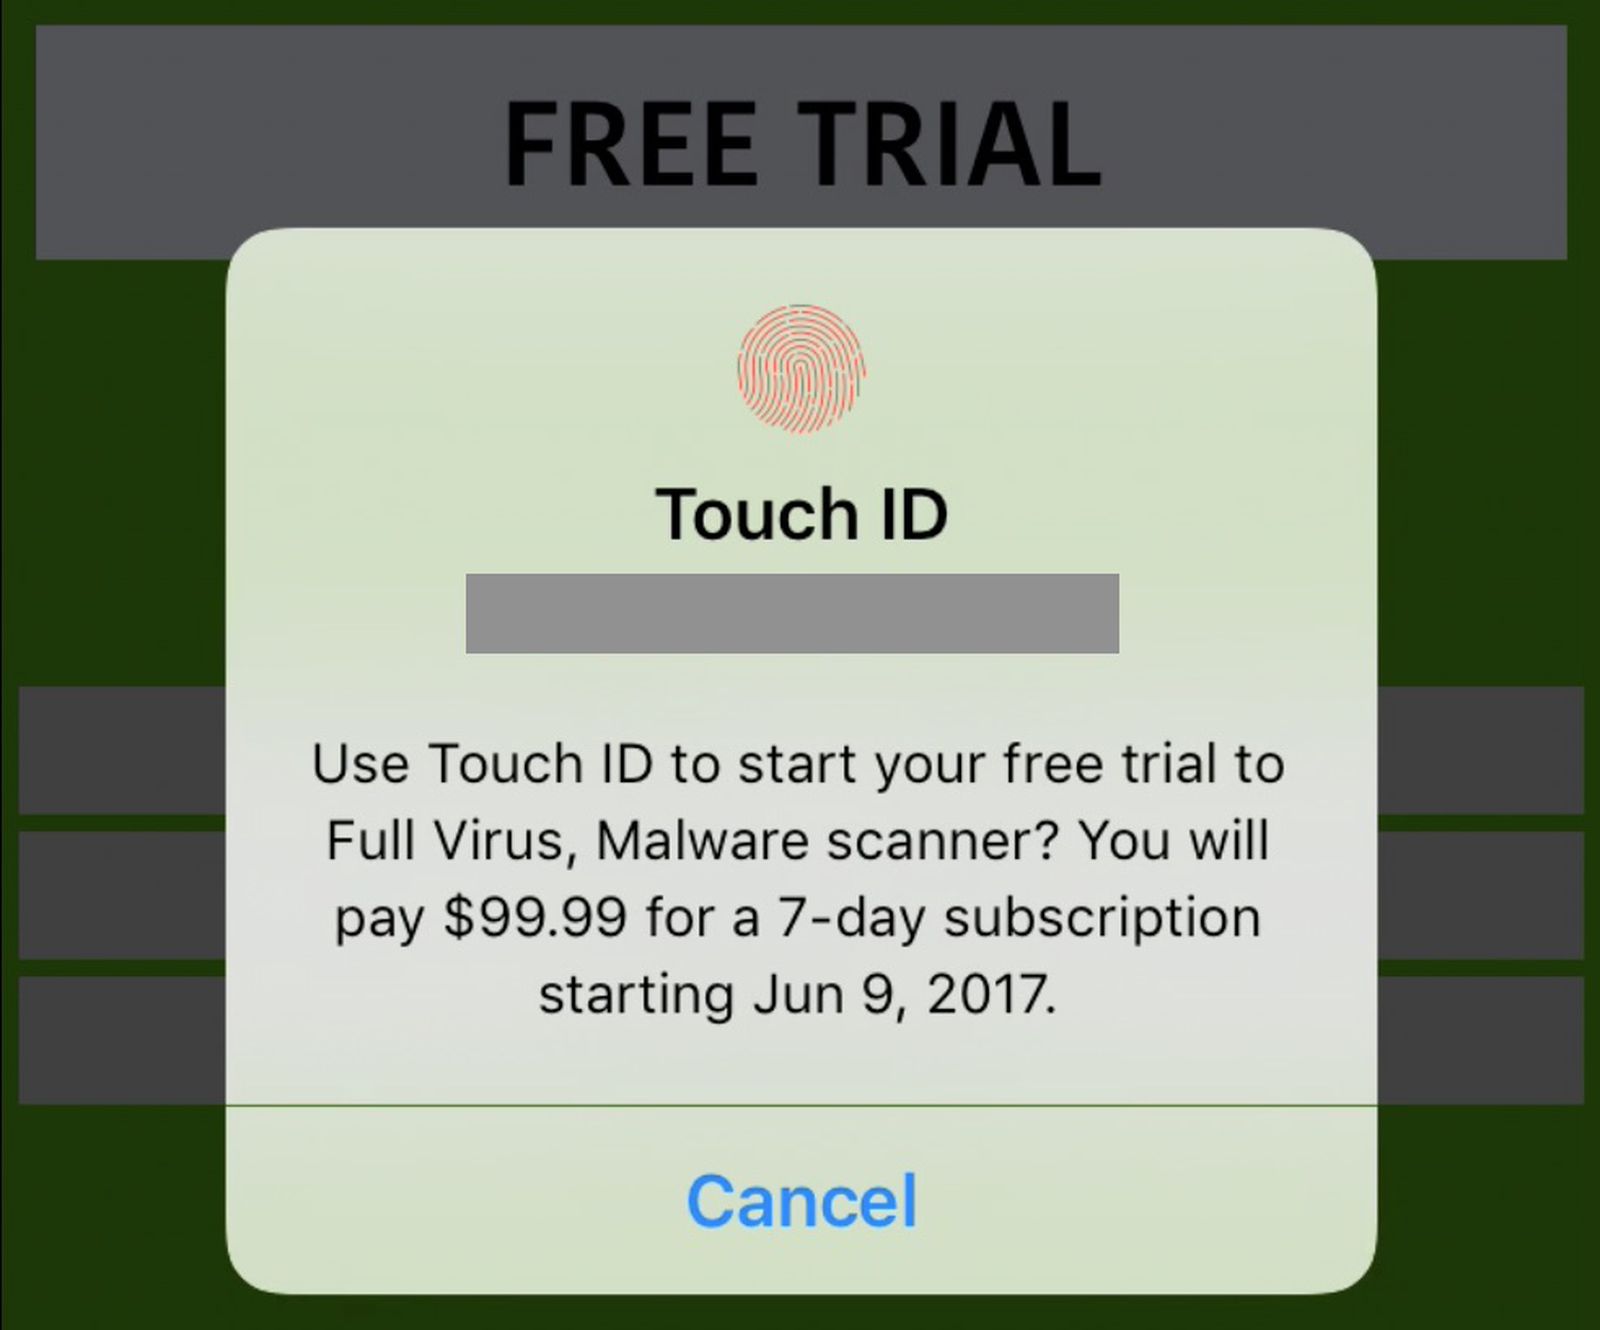 Report Reveals In-App Purchase Scams in the App Store - MacRumors